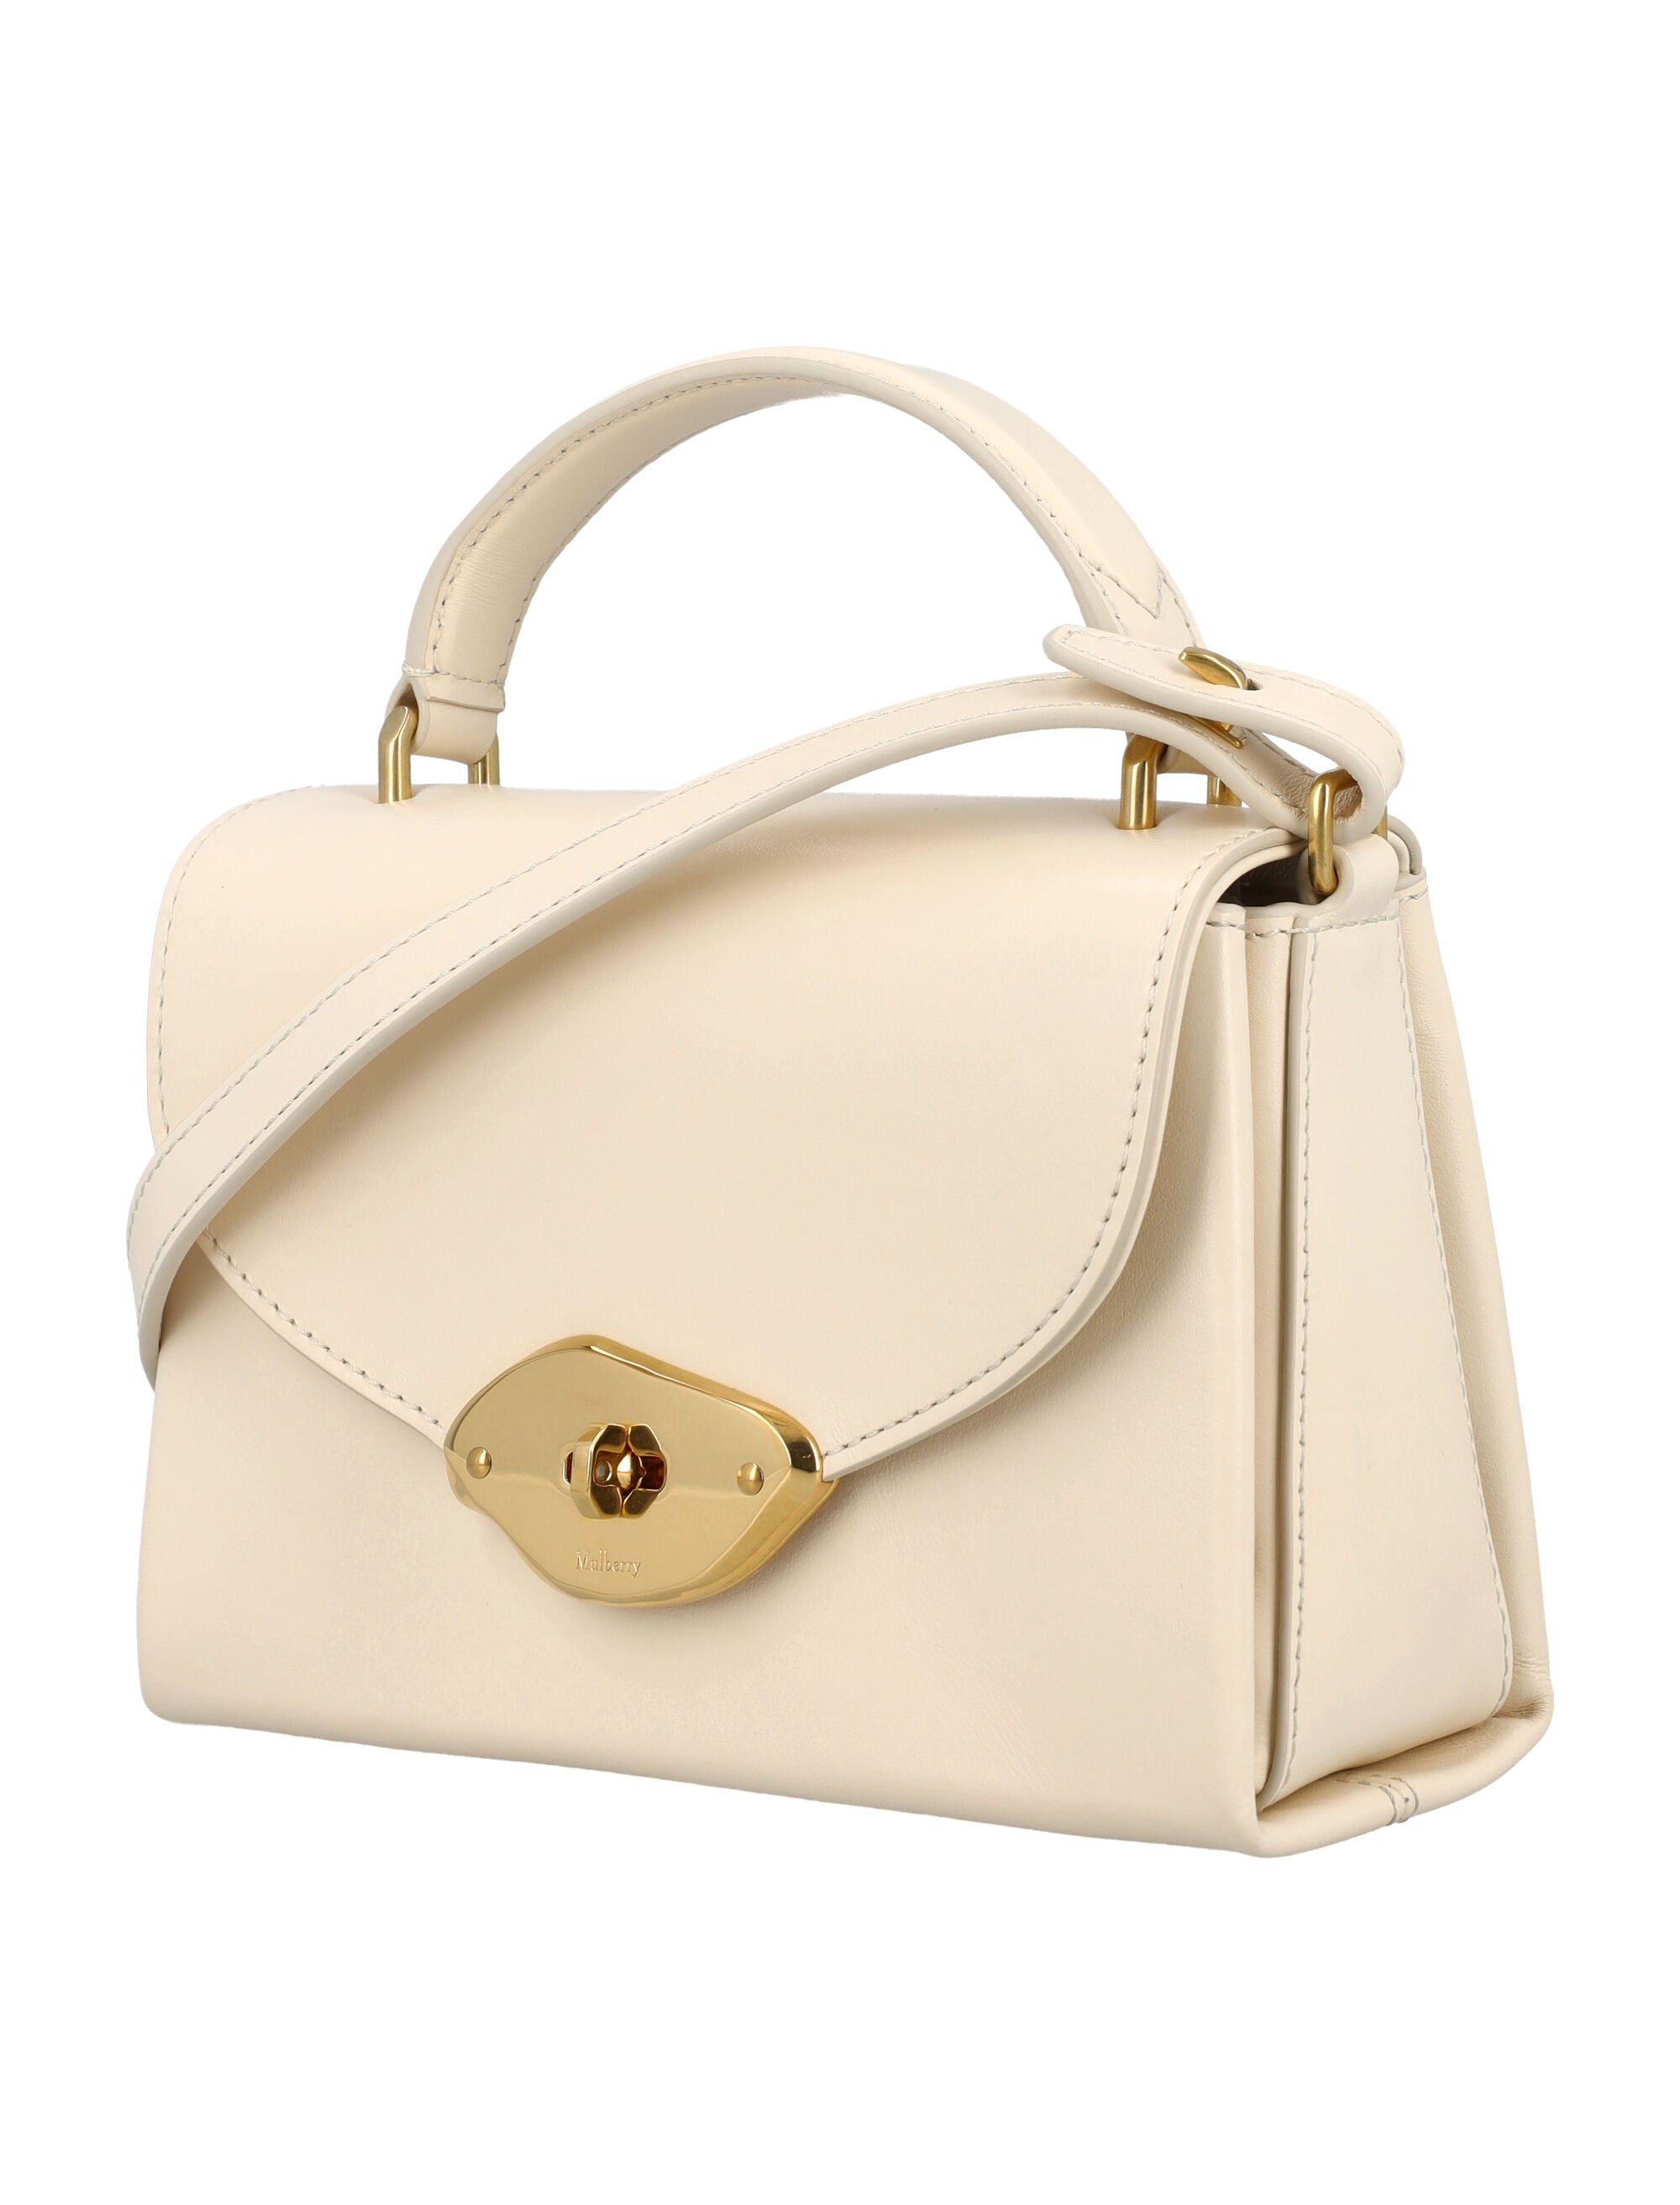 Shop Mulberry Elegant Mini Wool Top Handle Handbag With Brass Accents And Adjustable Leather Strap In White